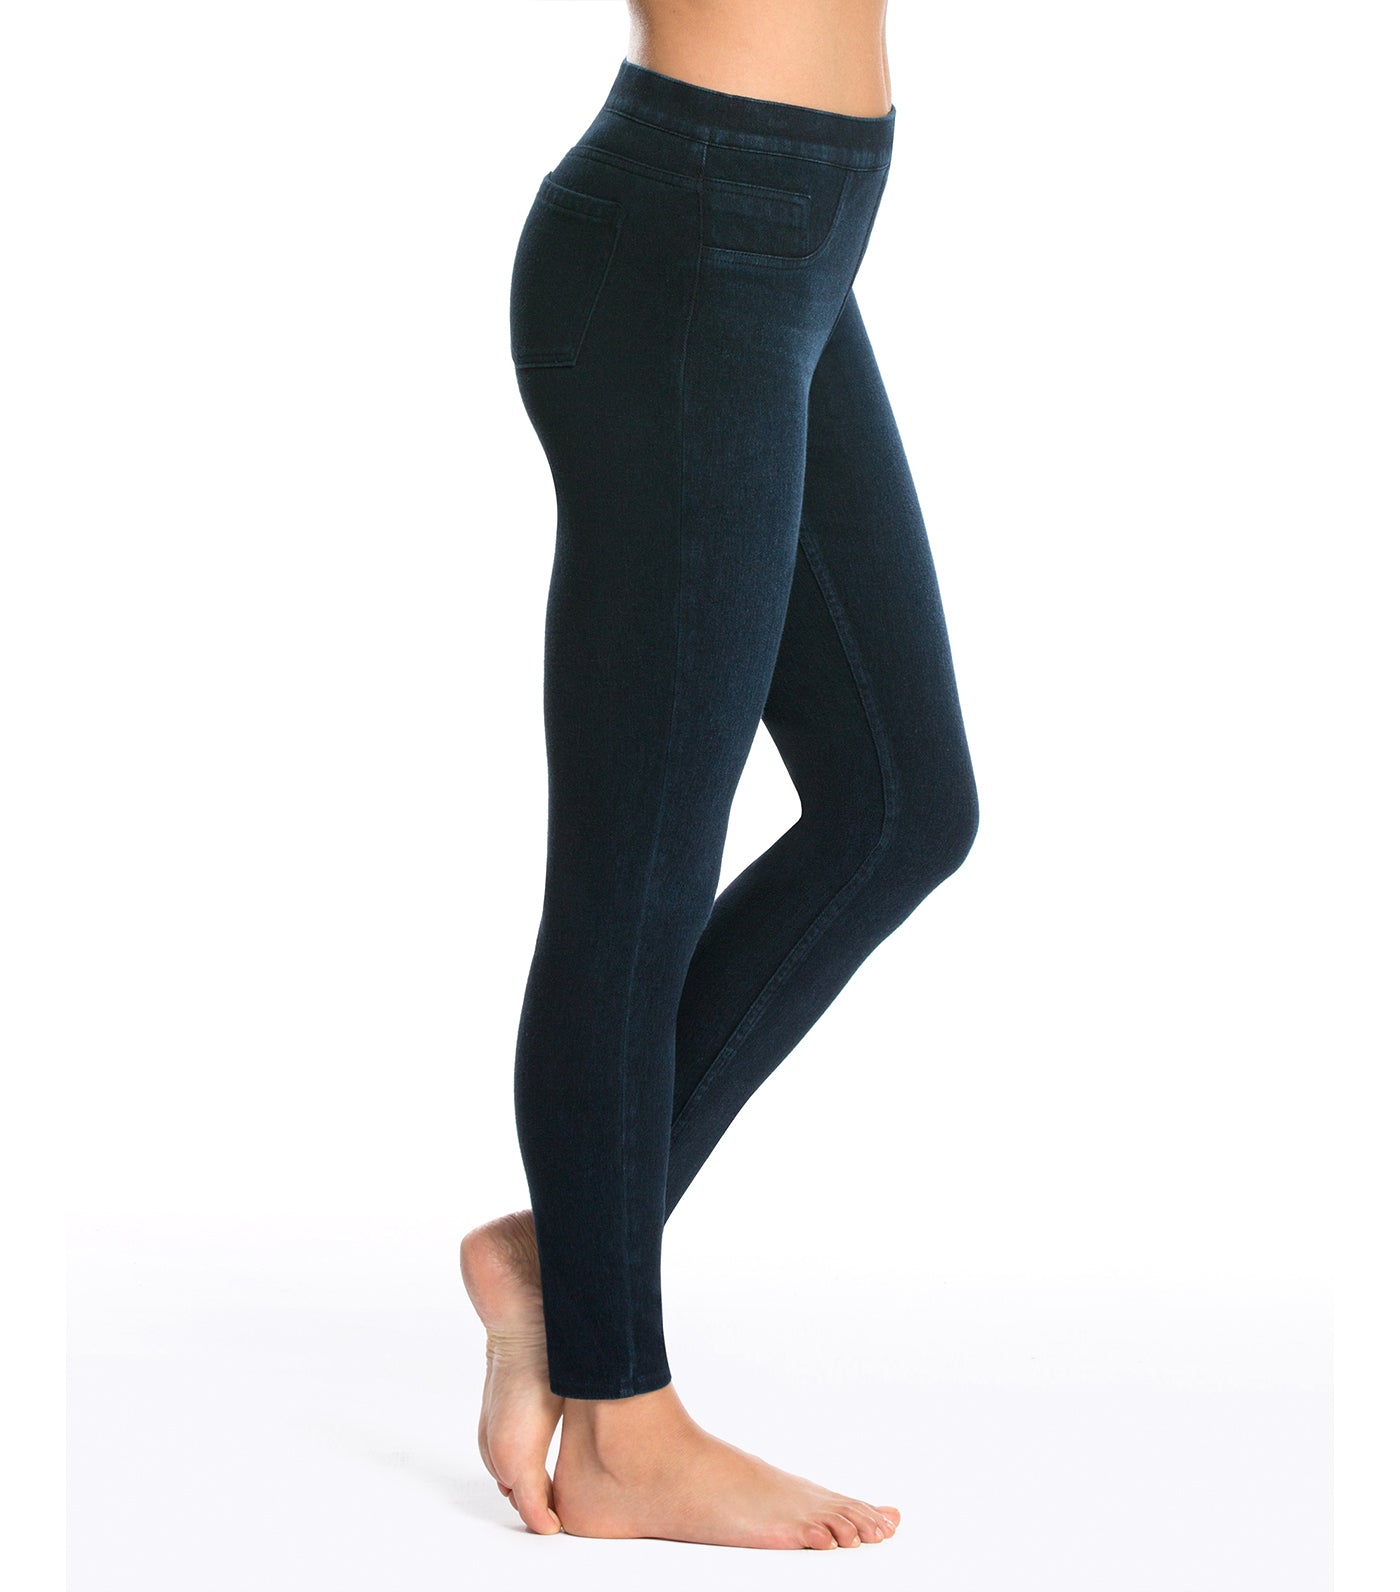 Assets by Spanx Navy Denim Wash Shaping Seamless Leggings Size Small